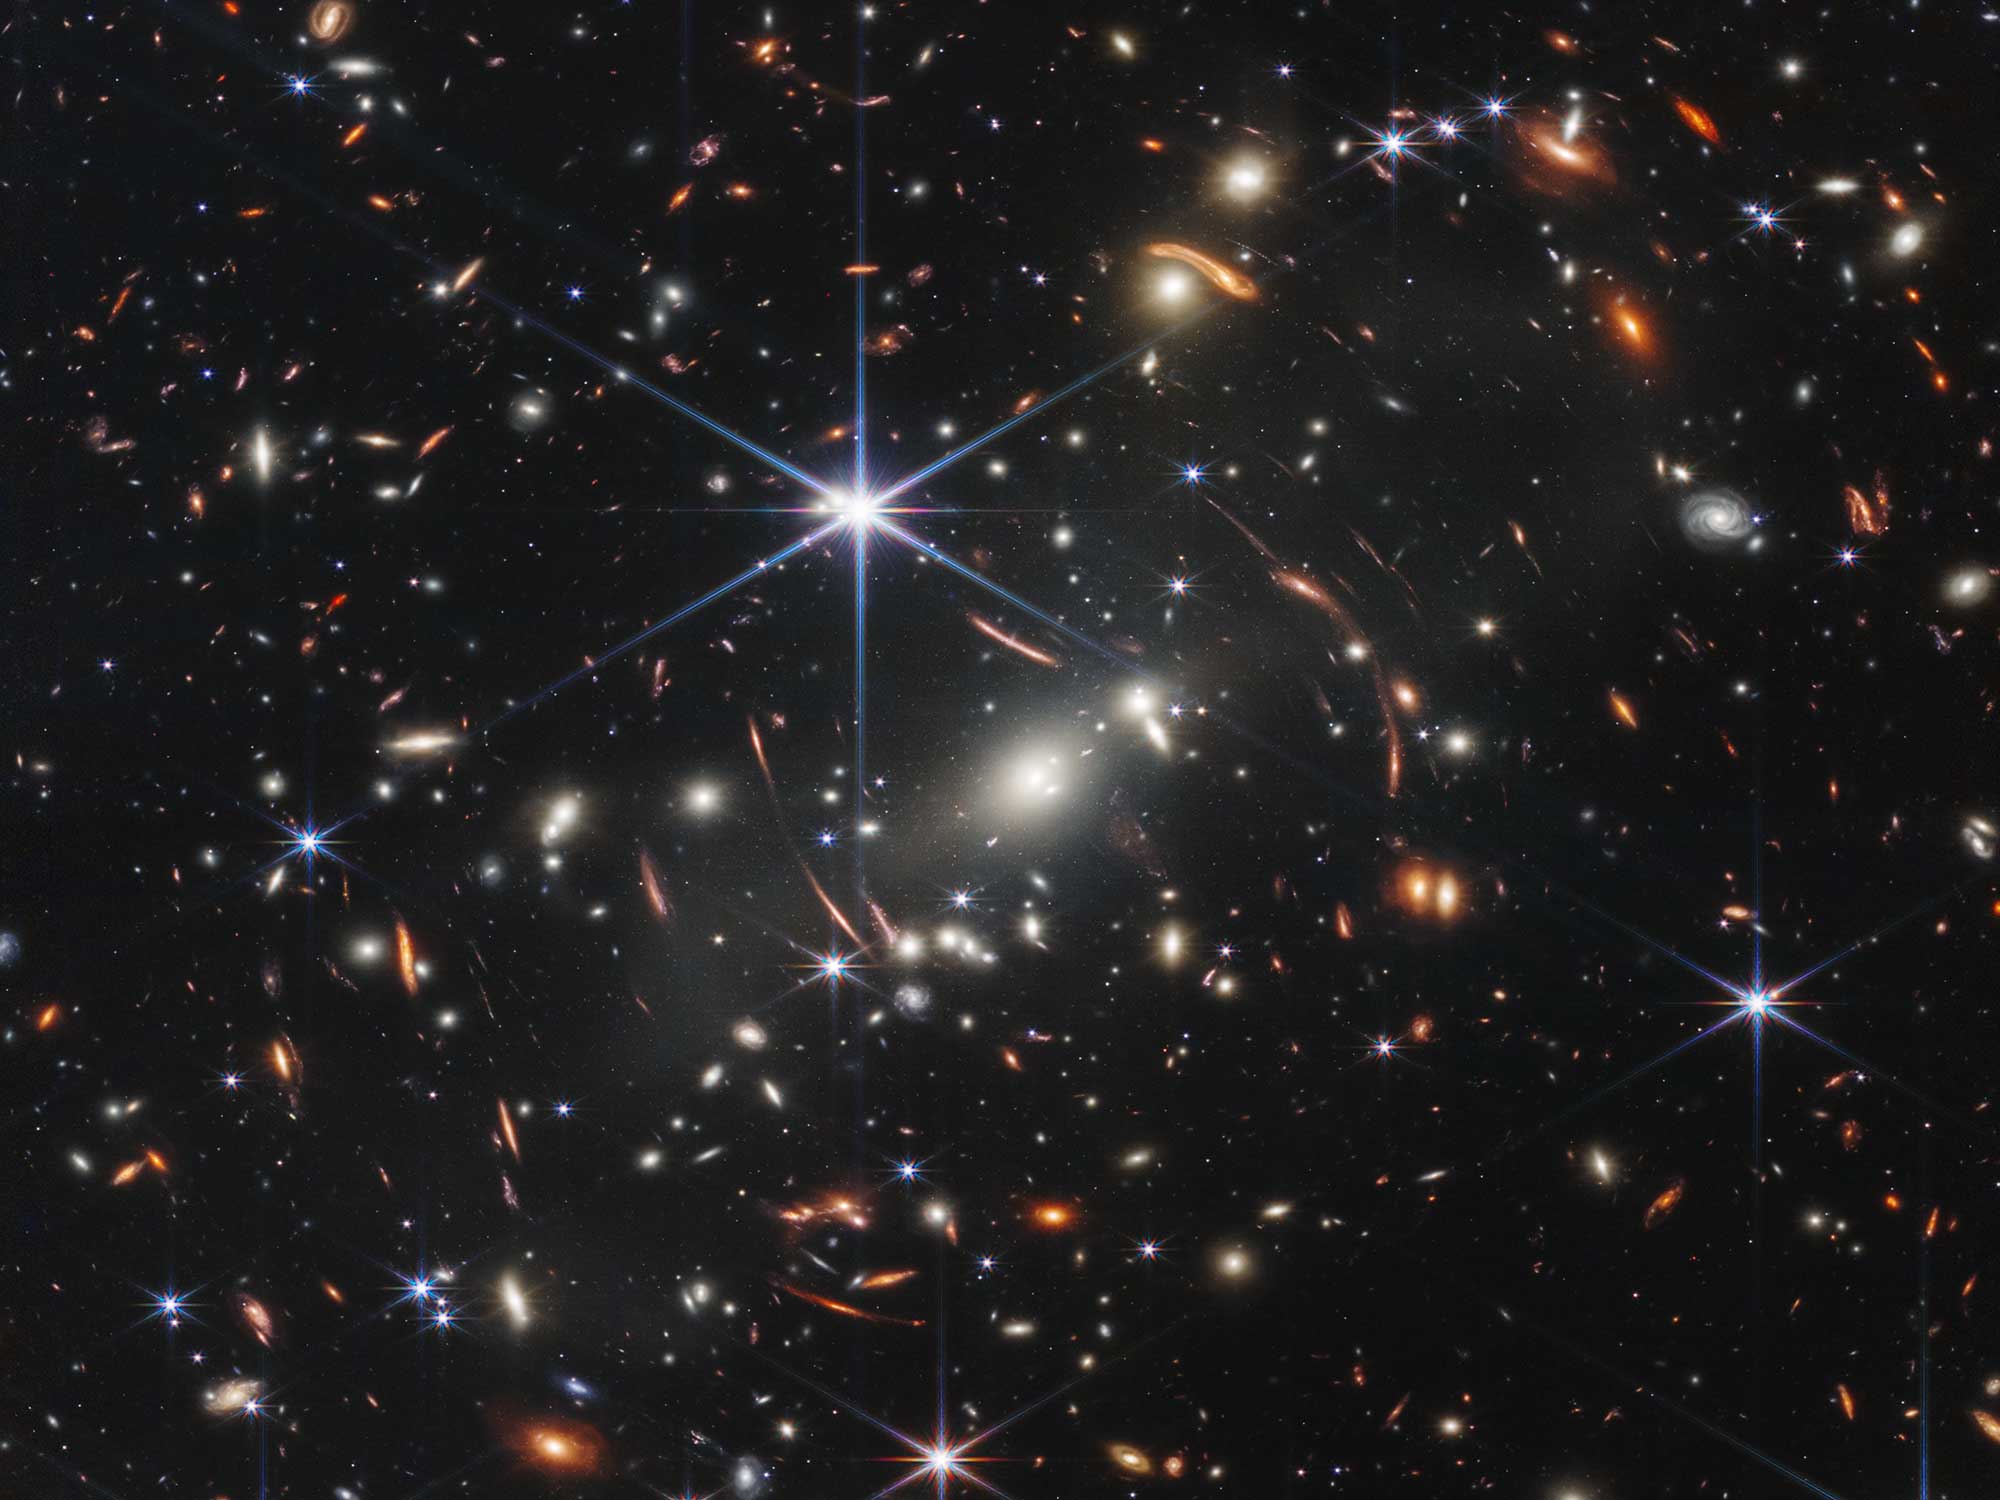 The James Webb Space Telescope’s first image shows the universe in a new light